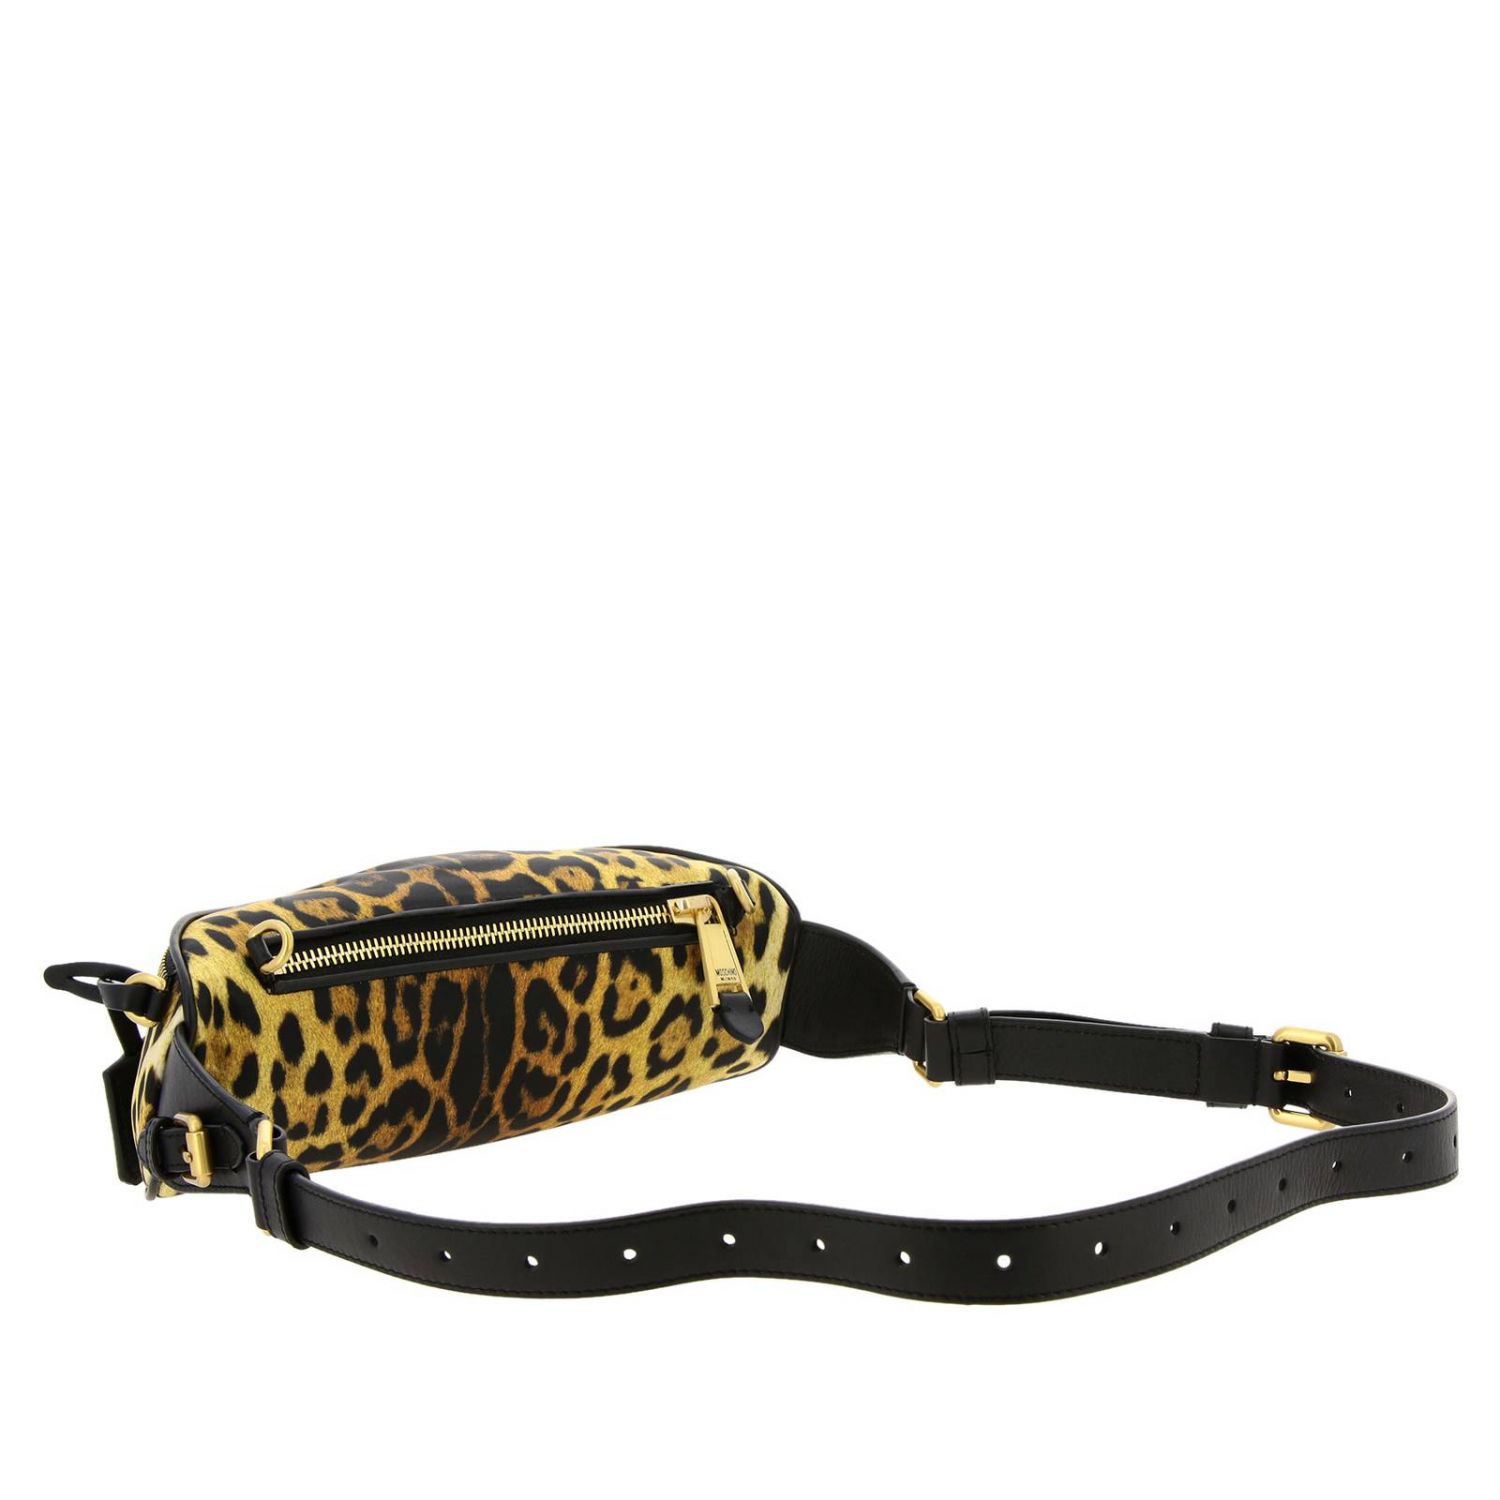 Moschino Couture Outlet: Shoulder bag women | Belt Bag Moschino Couture ...